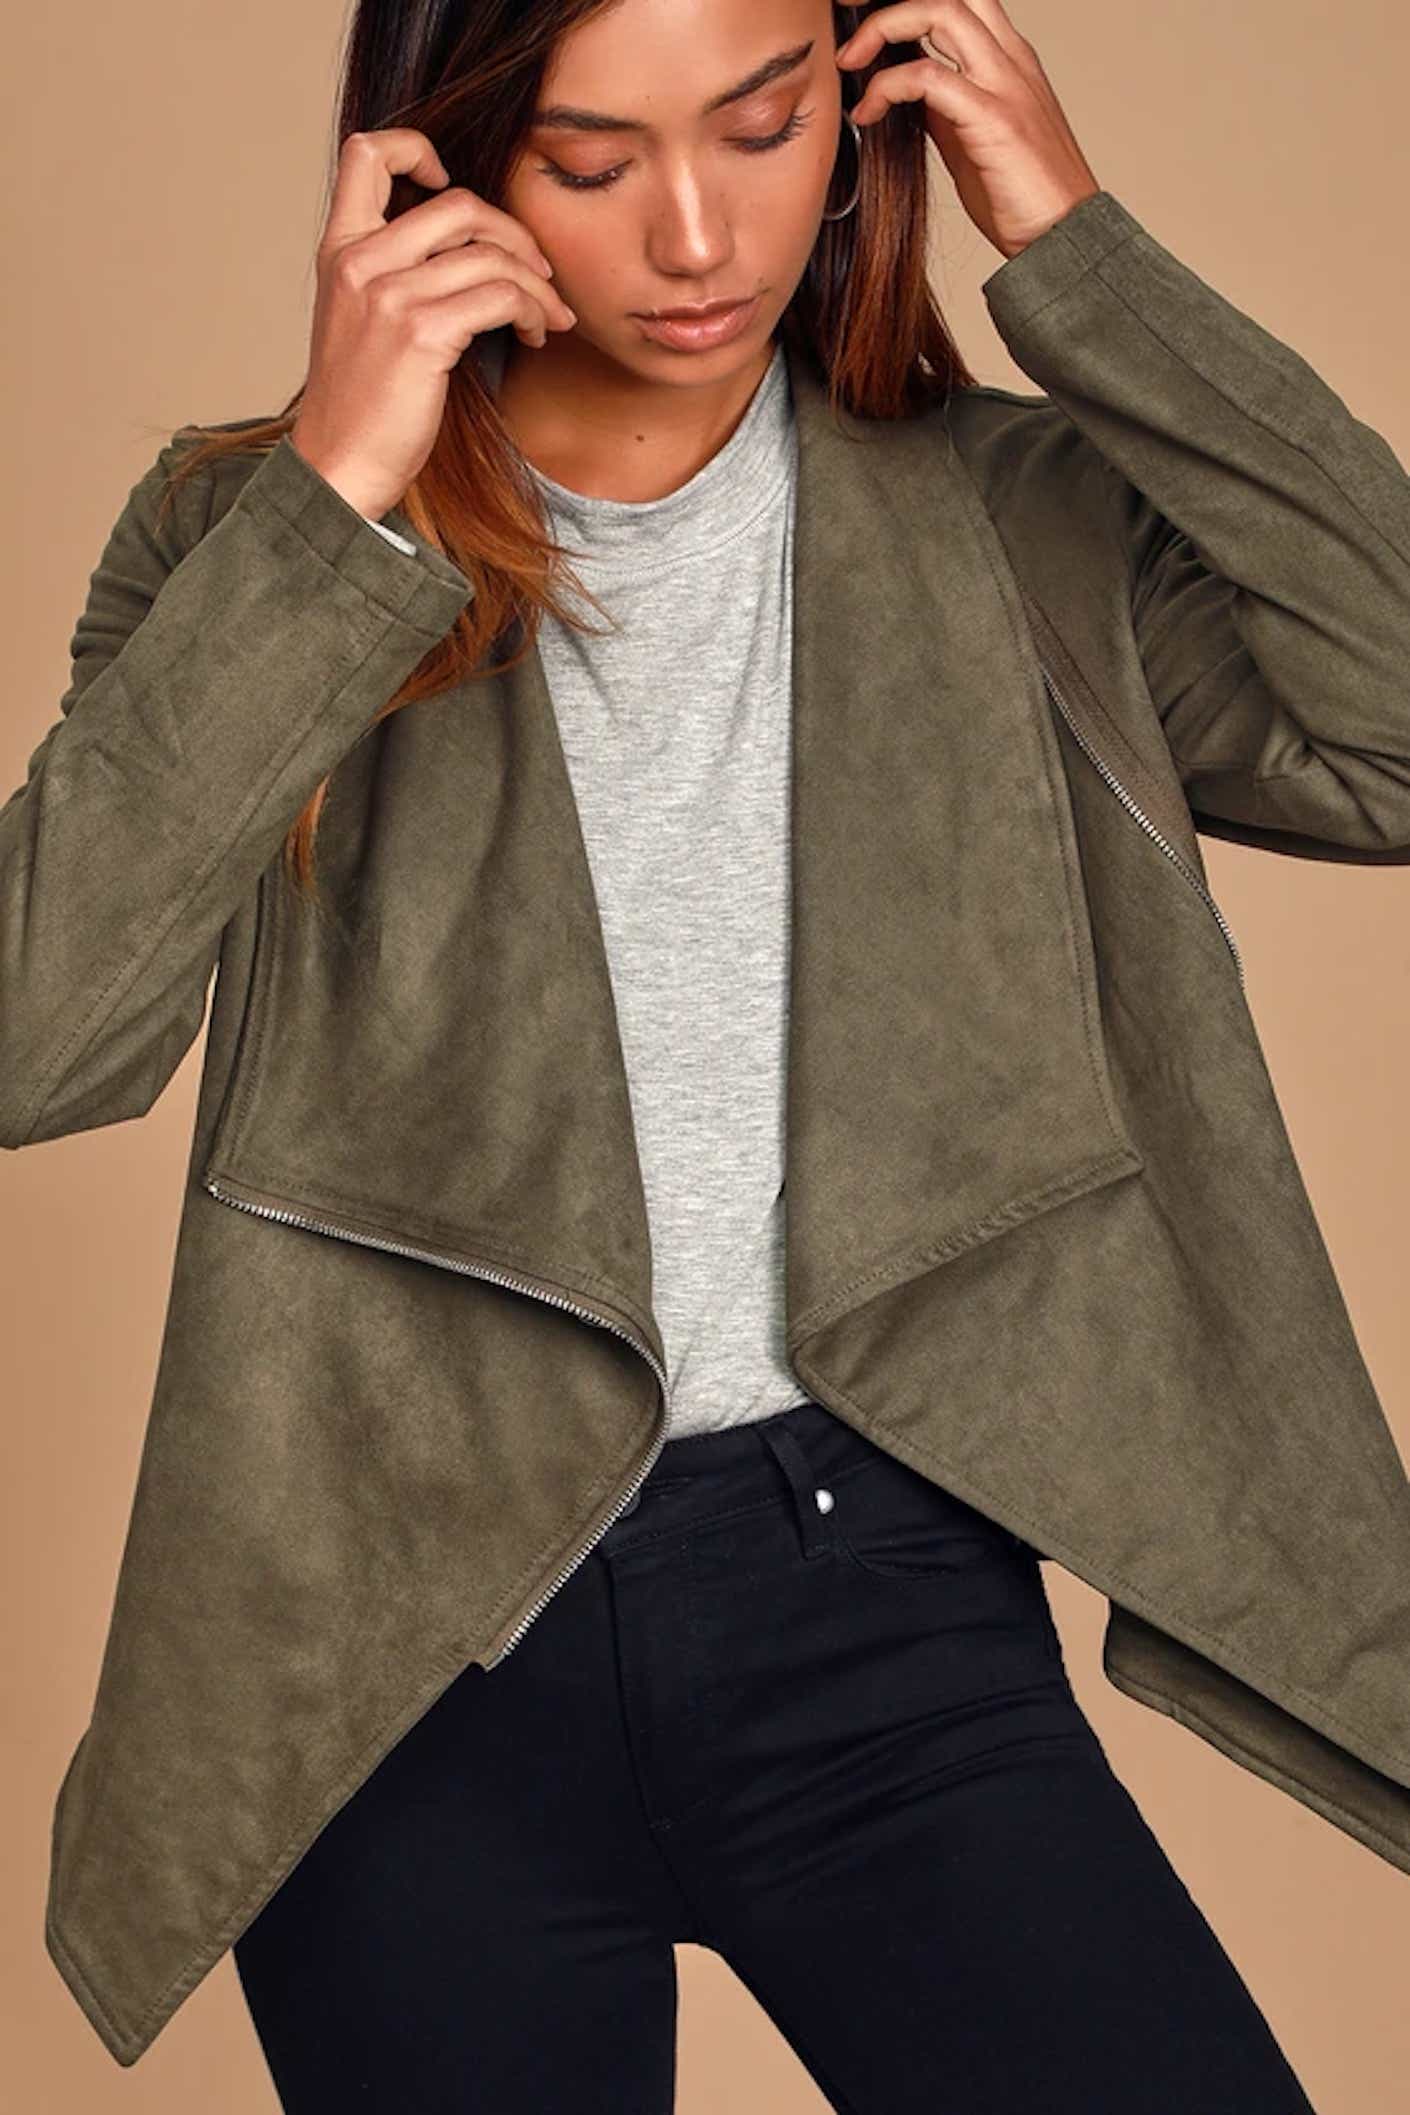 A woman wears a suede moto jacket with dramatic lapels.